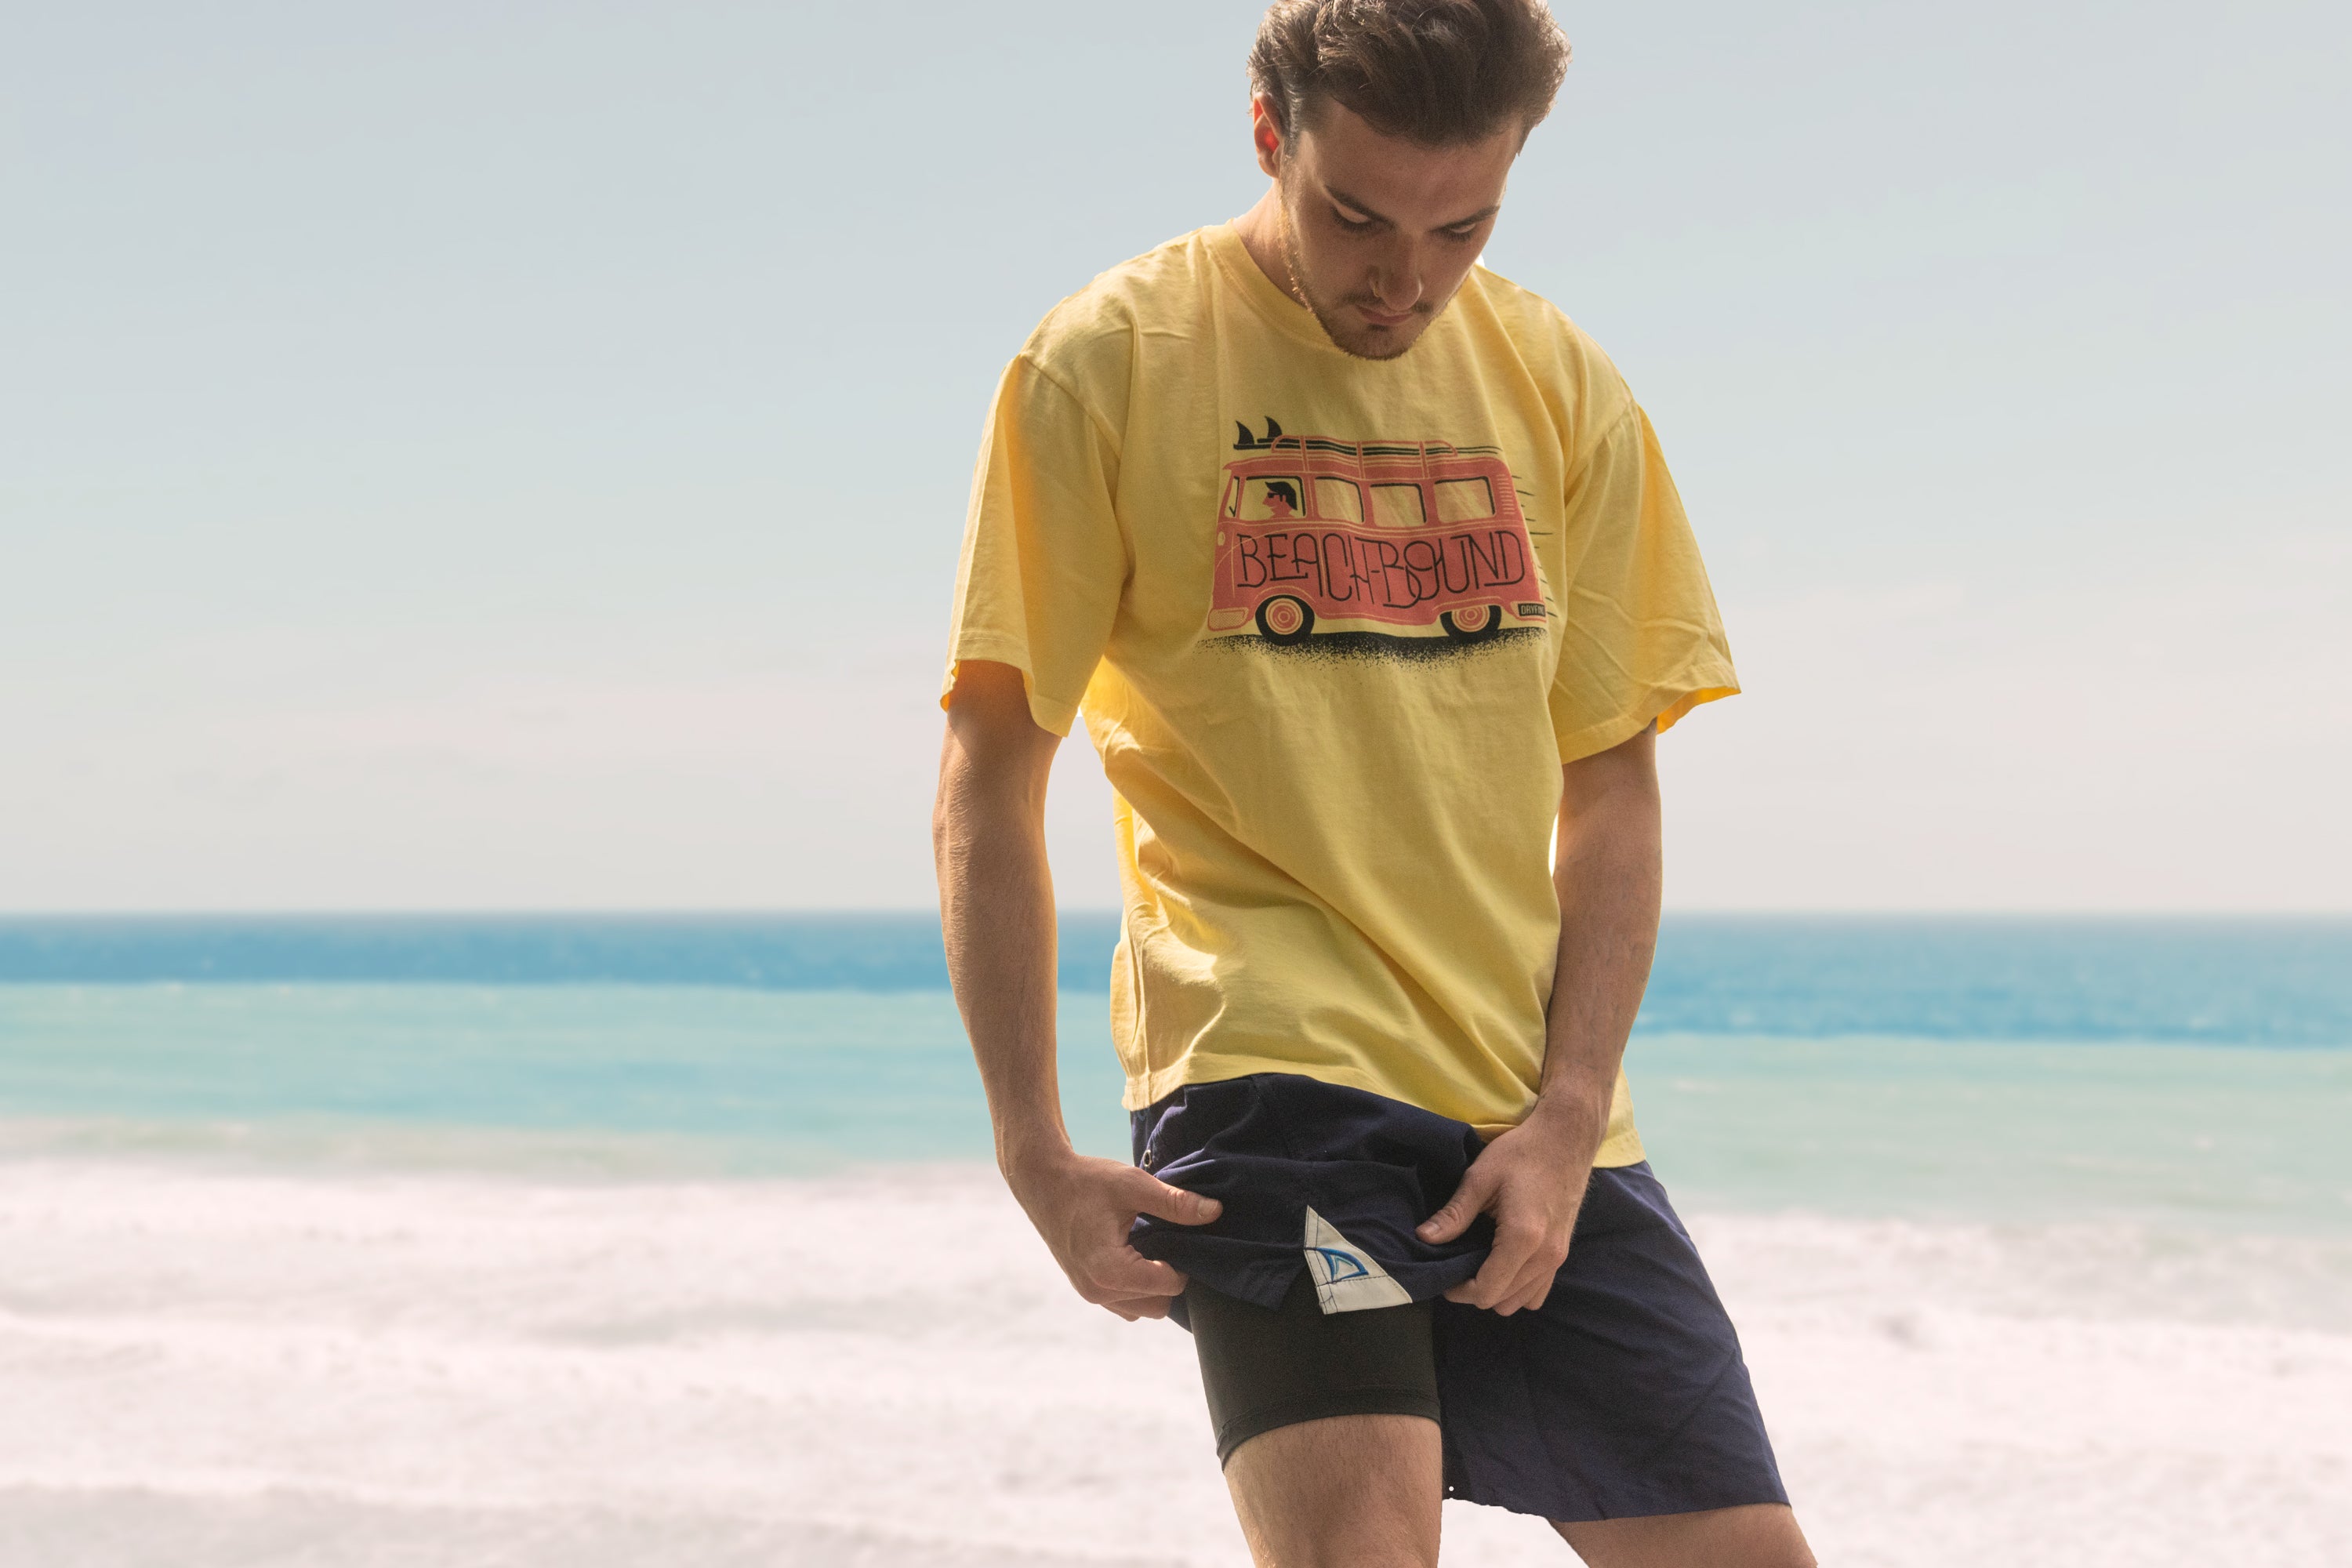 How To Stop Thigh Chafing When Wearing Shorts Or Pants